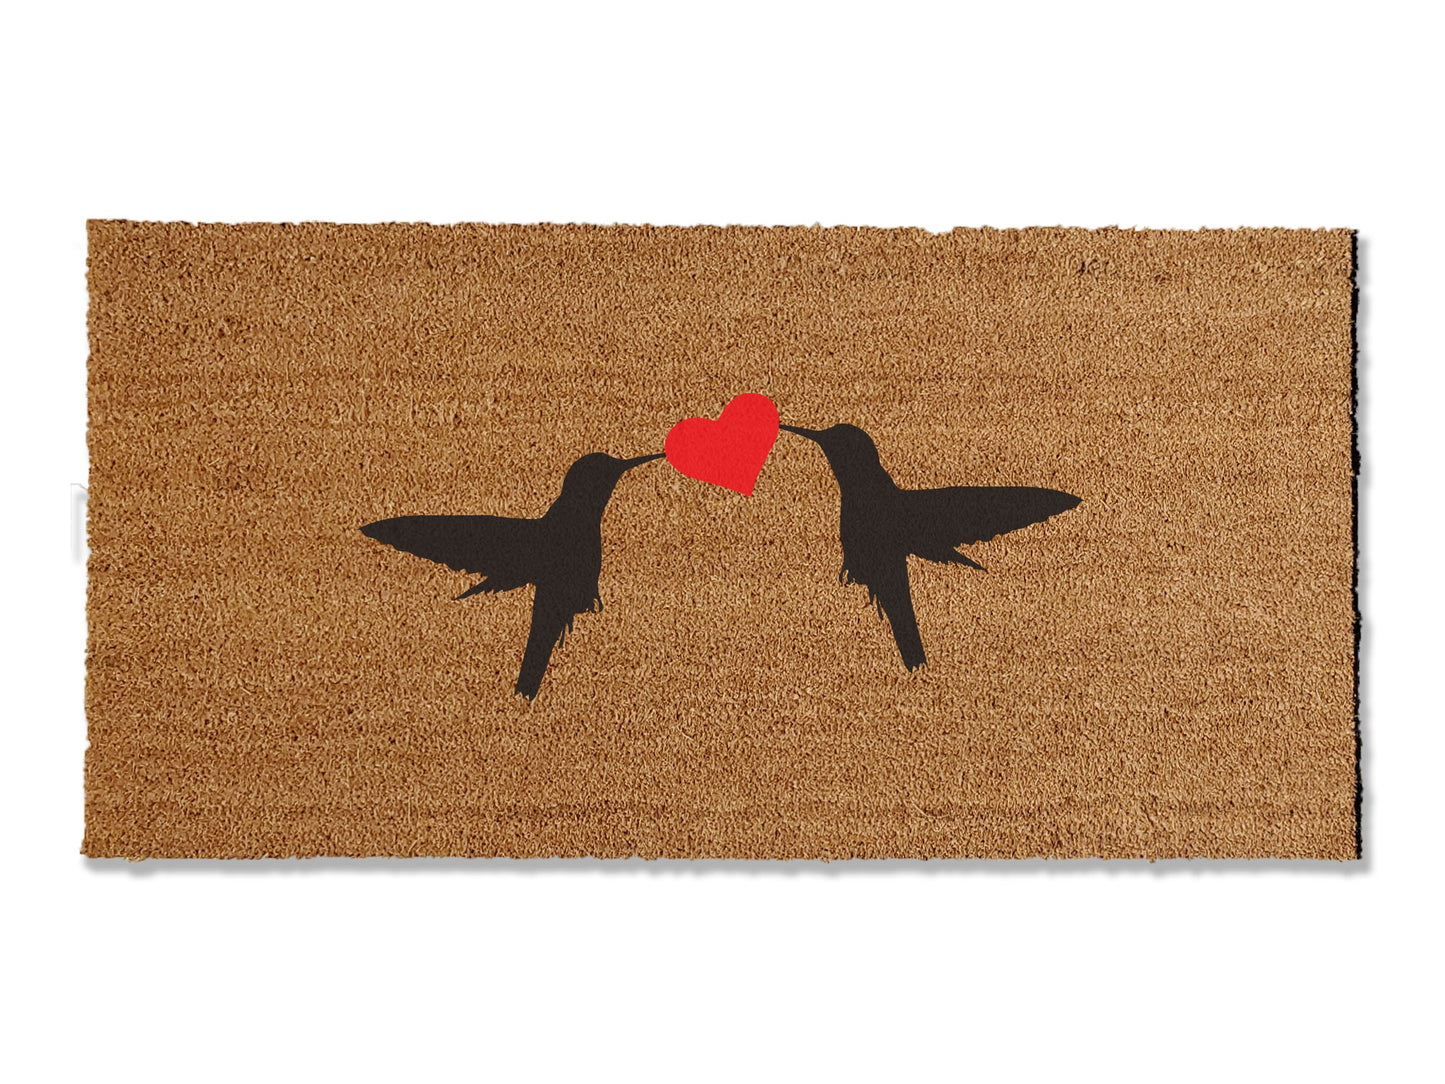 Enhance your entryway with our 1/2-inch thick coir doormat adorned with two hummingbirds and a heart in the middle. Available in multiple sizes, this charming mat not only adds a touch of nature to your doorstep but is also highly effective at trapping dirt. 